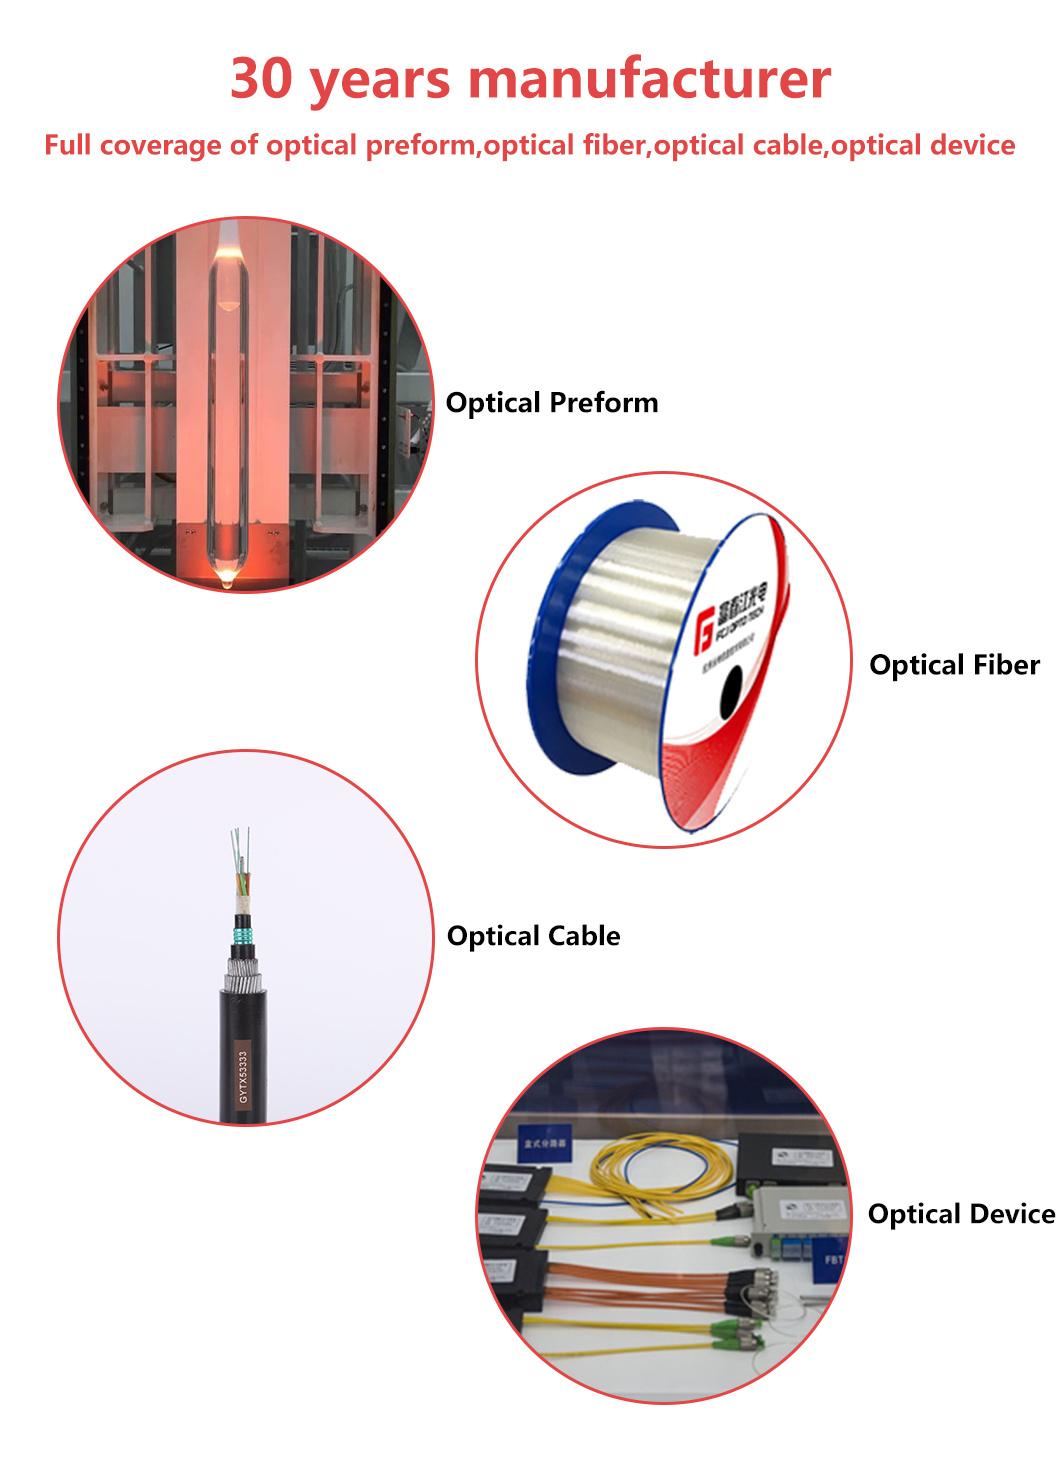 Applicable for All Optical Cable Types Including Ribbons Optic Fiber Color Glass Factory G657A1